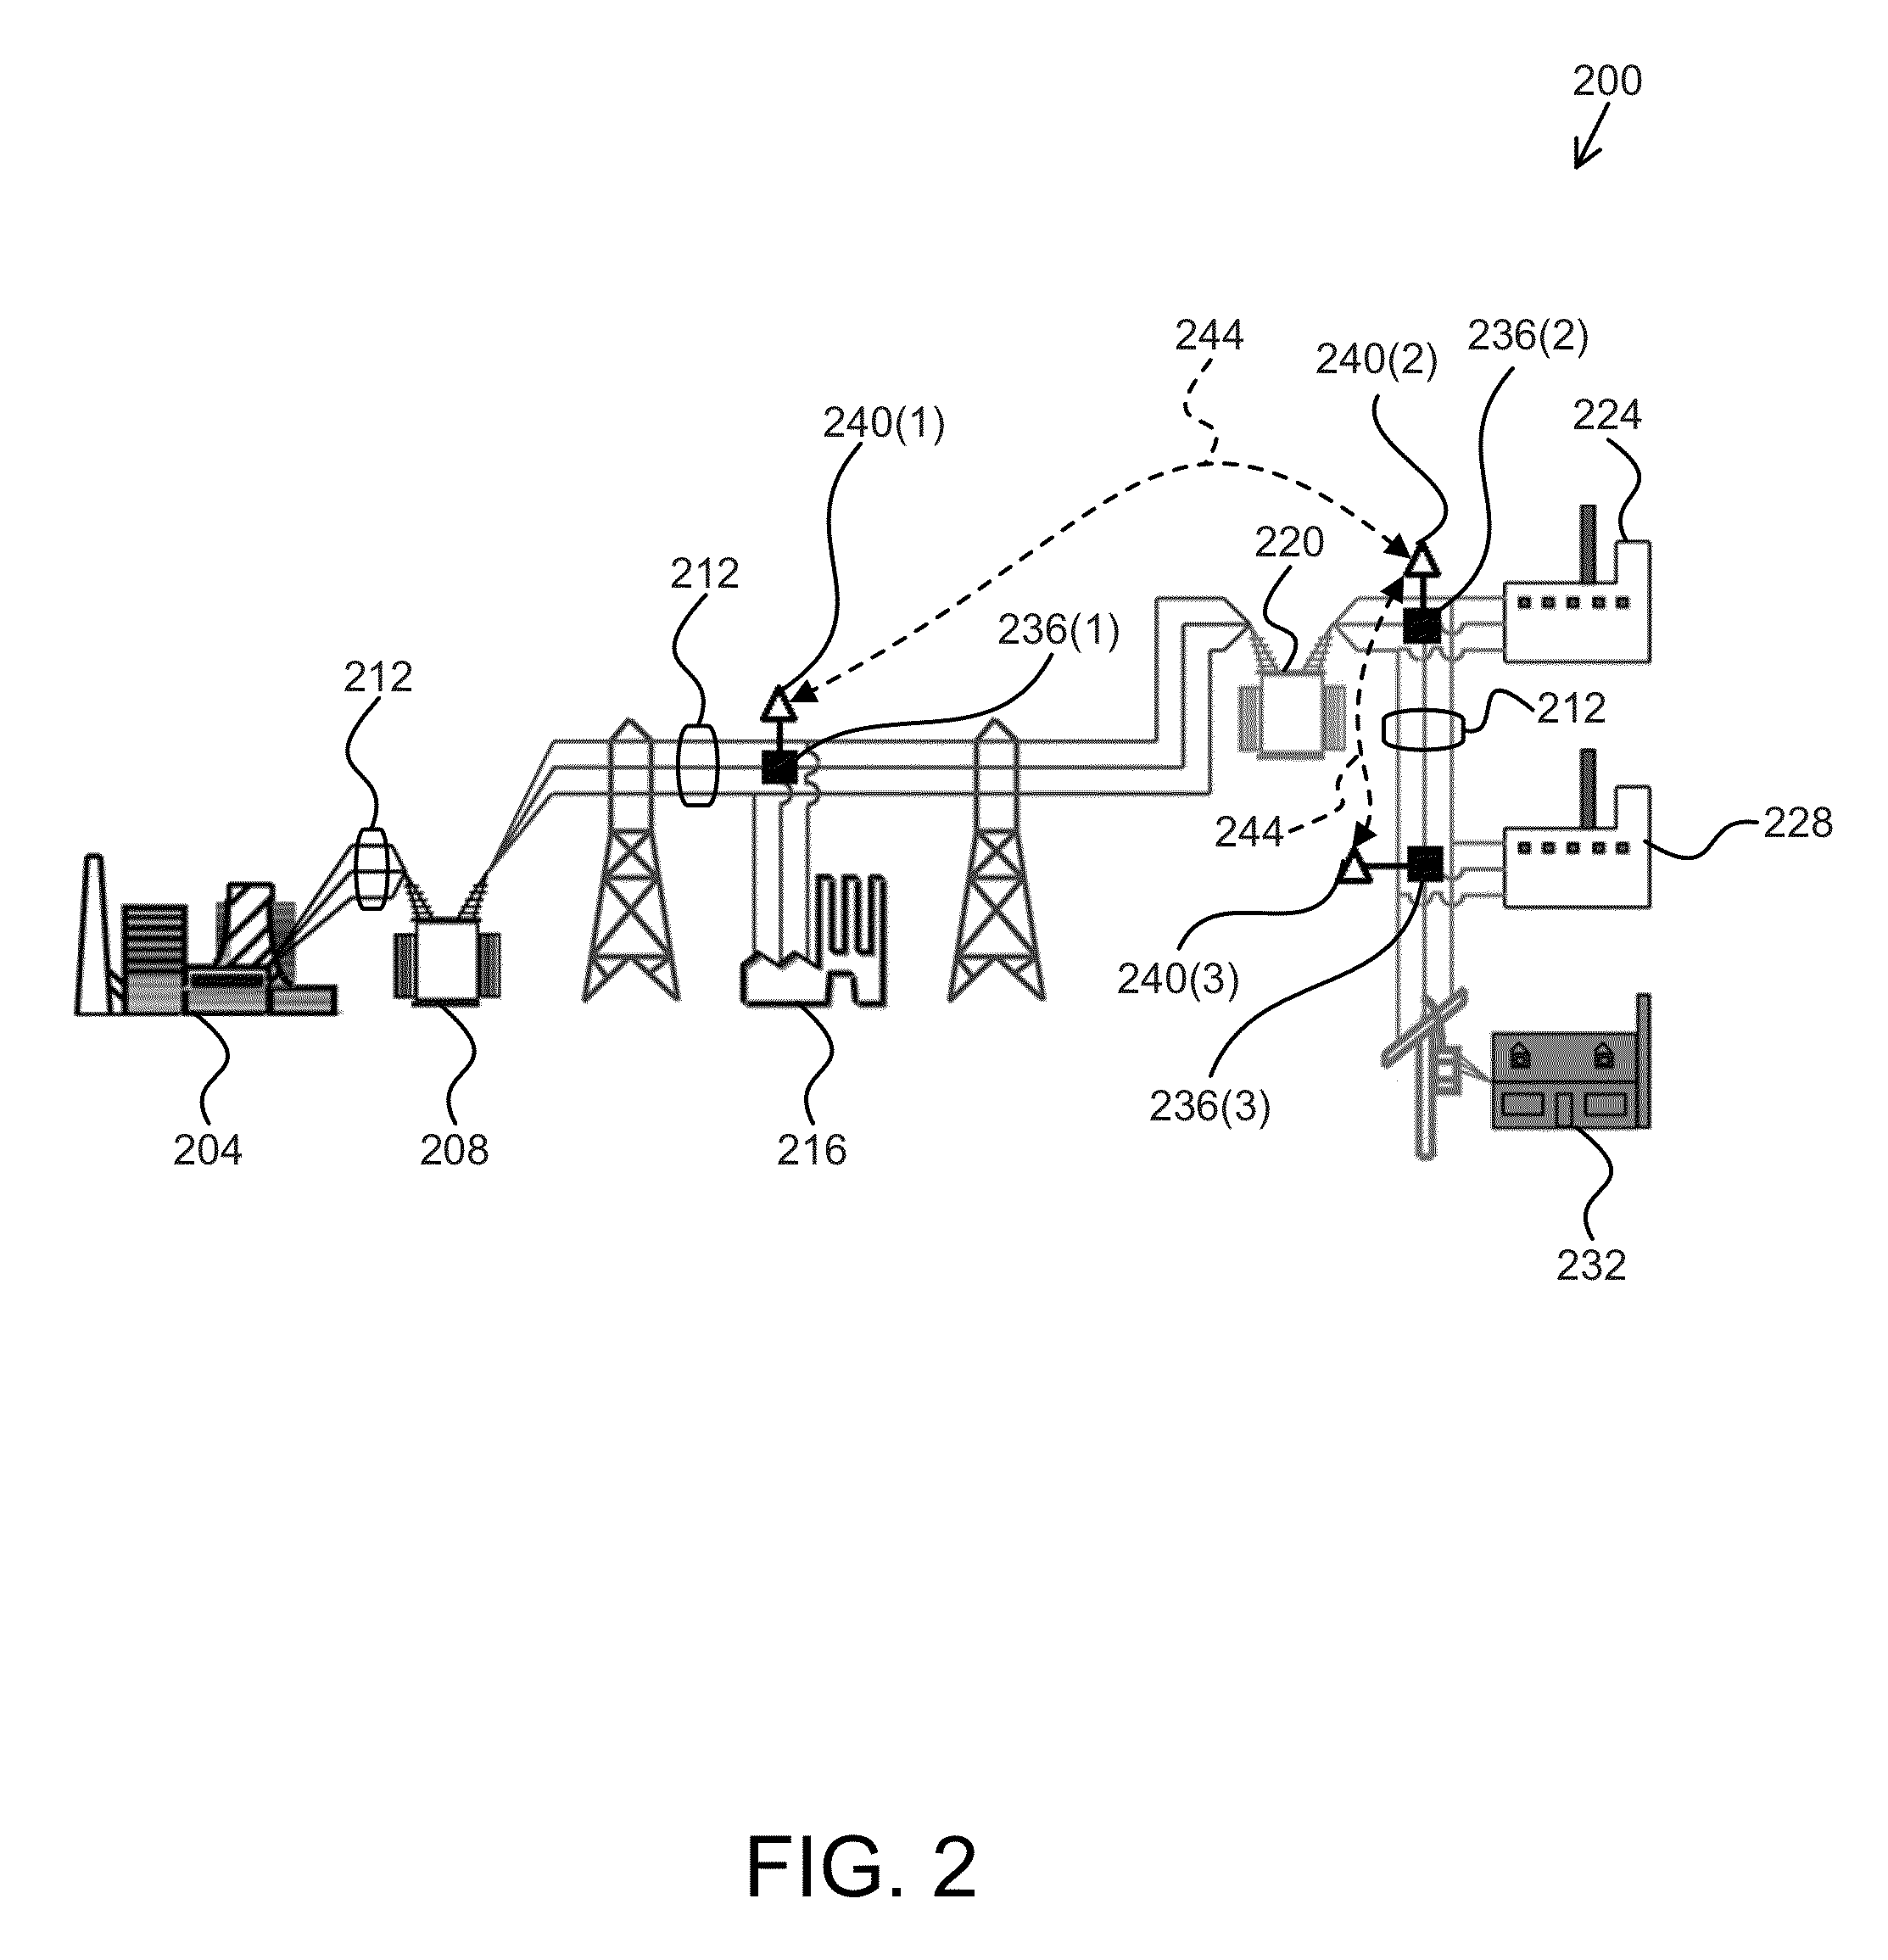 Distributed Methods and Software For Balancing Supply and Demand In An Electric Power Network